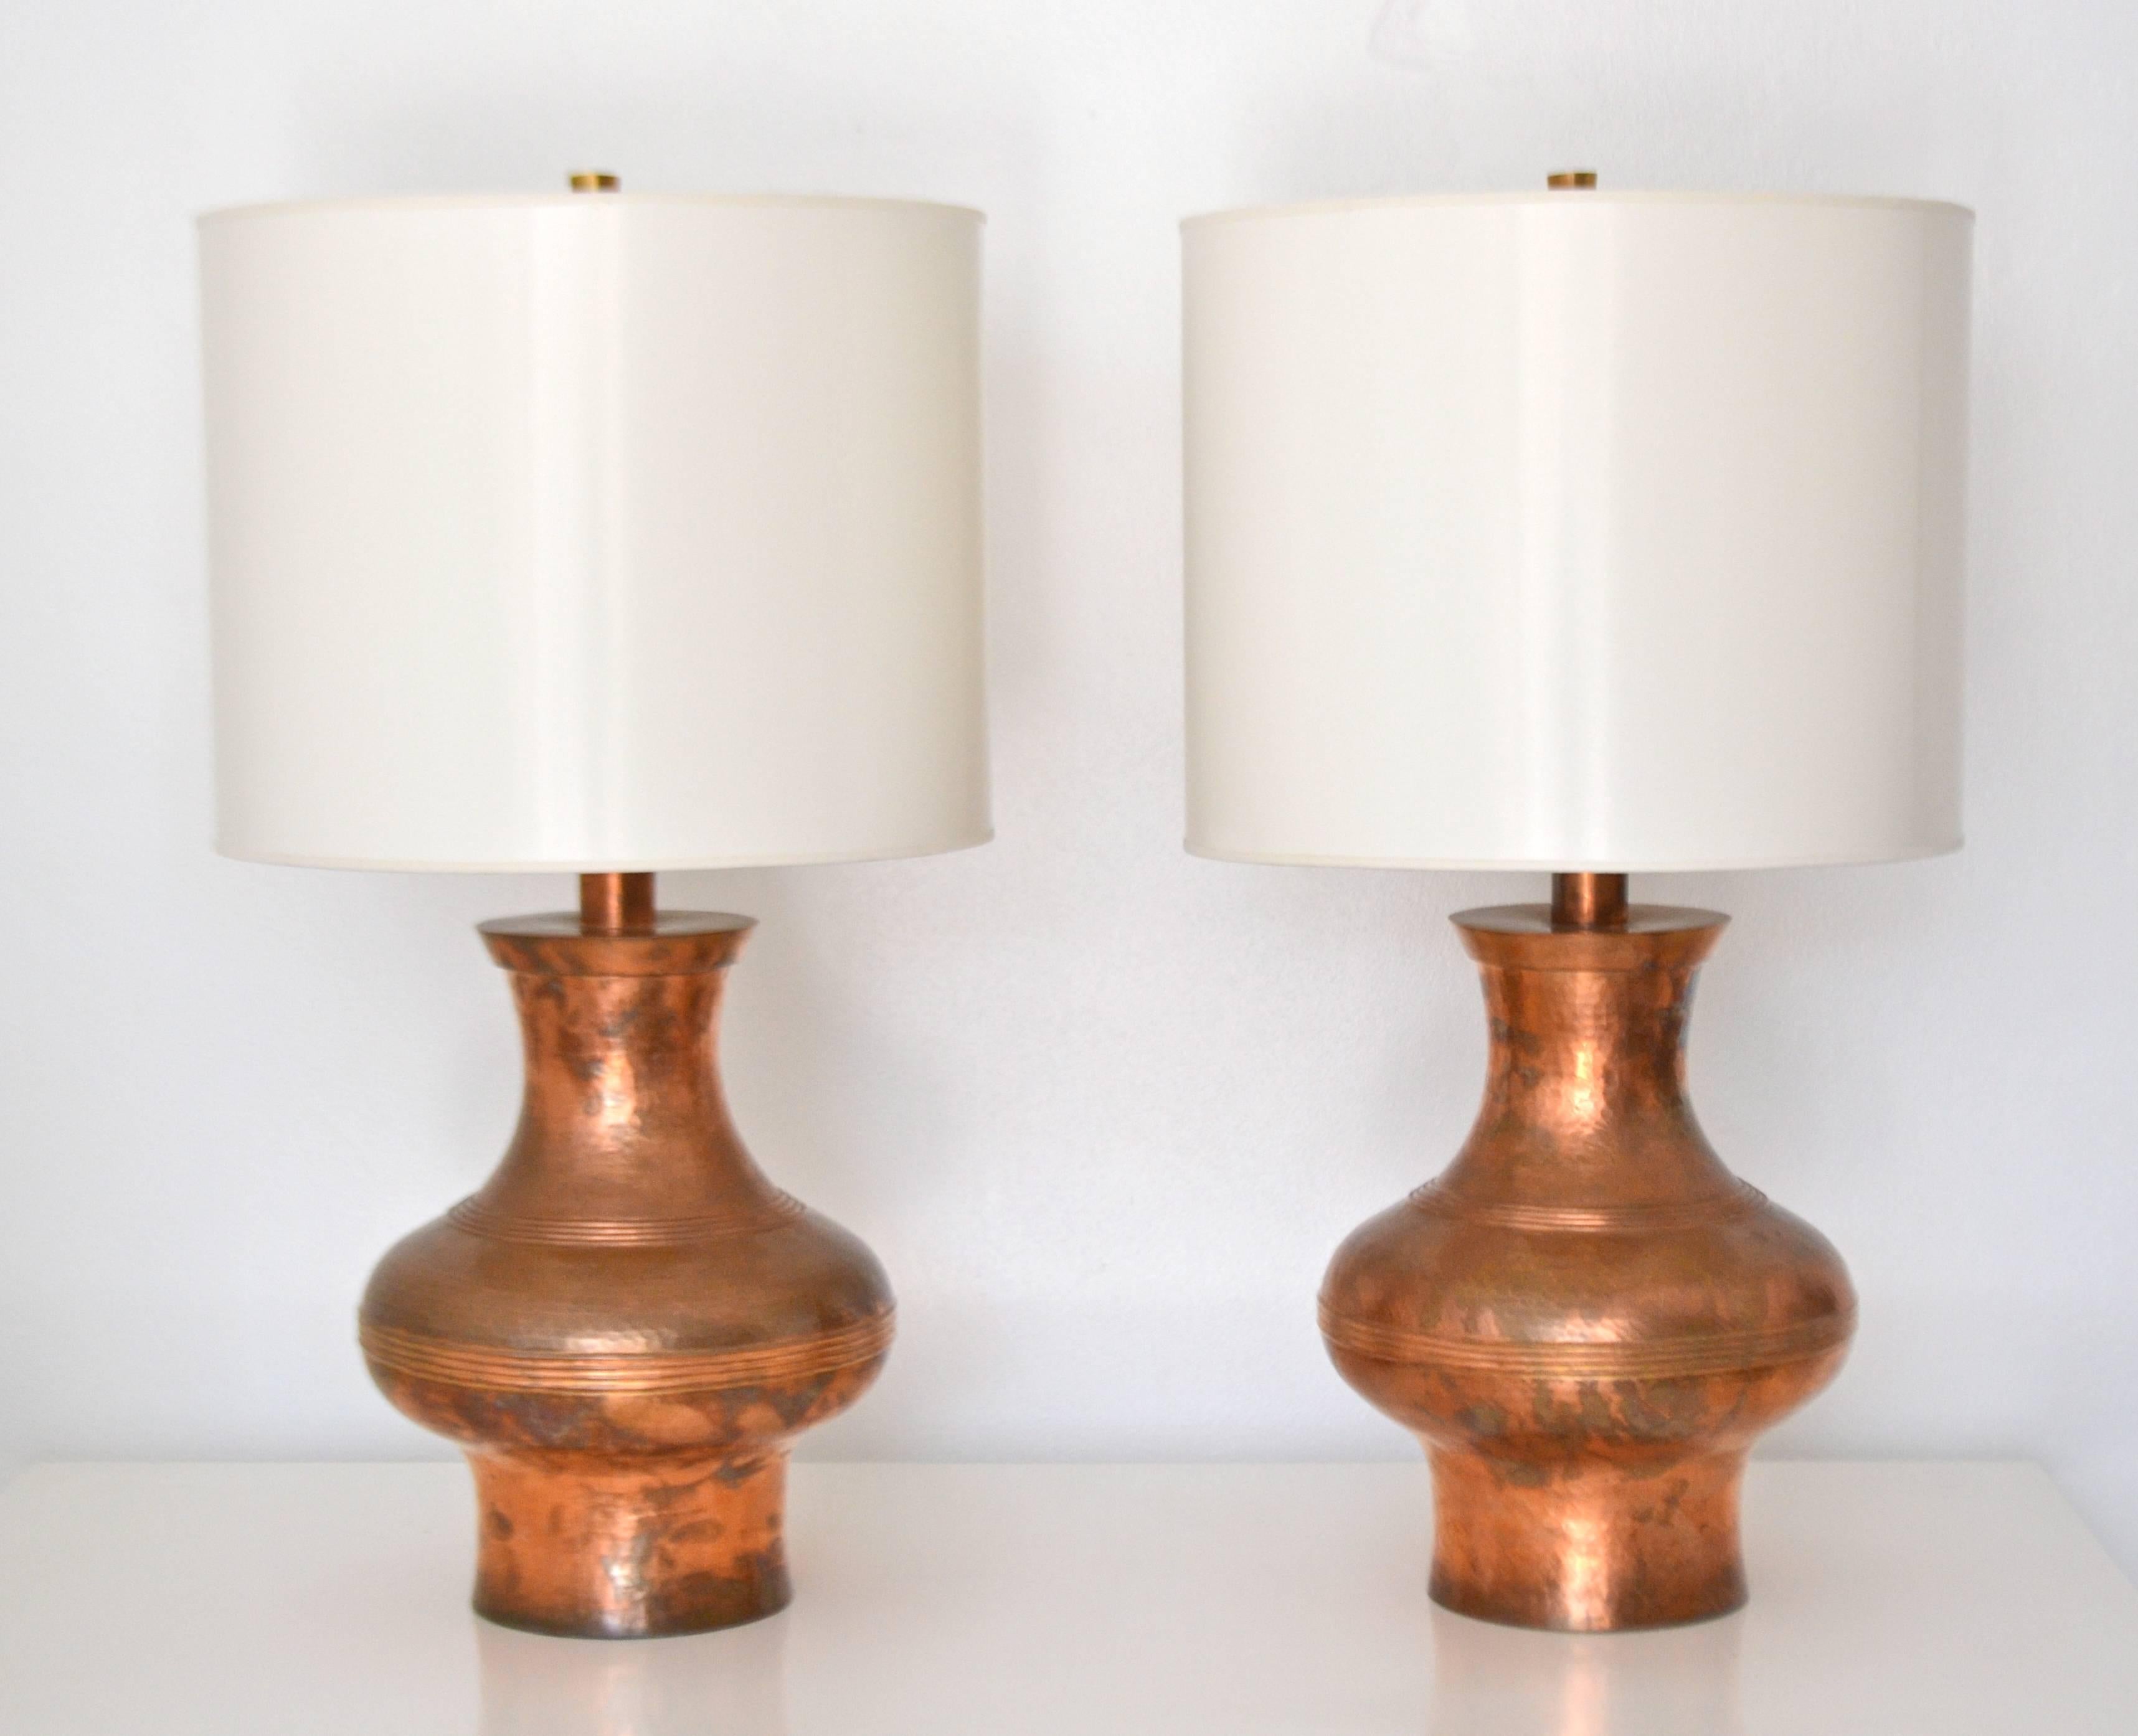 Pair of Hammered Copper Table Lamps In Good Condition For Sale In West Palm Beach, FL